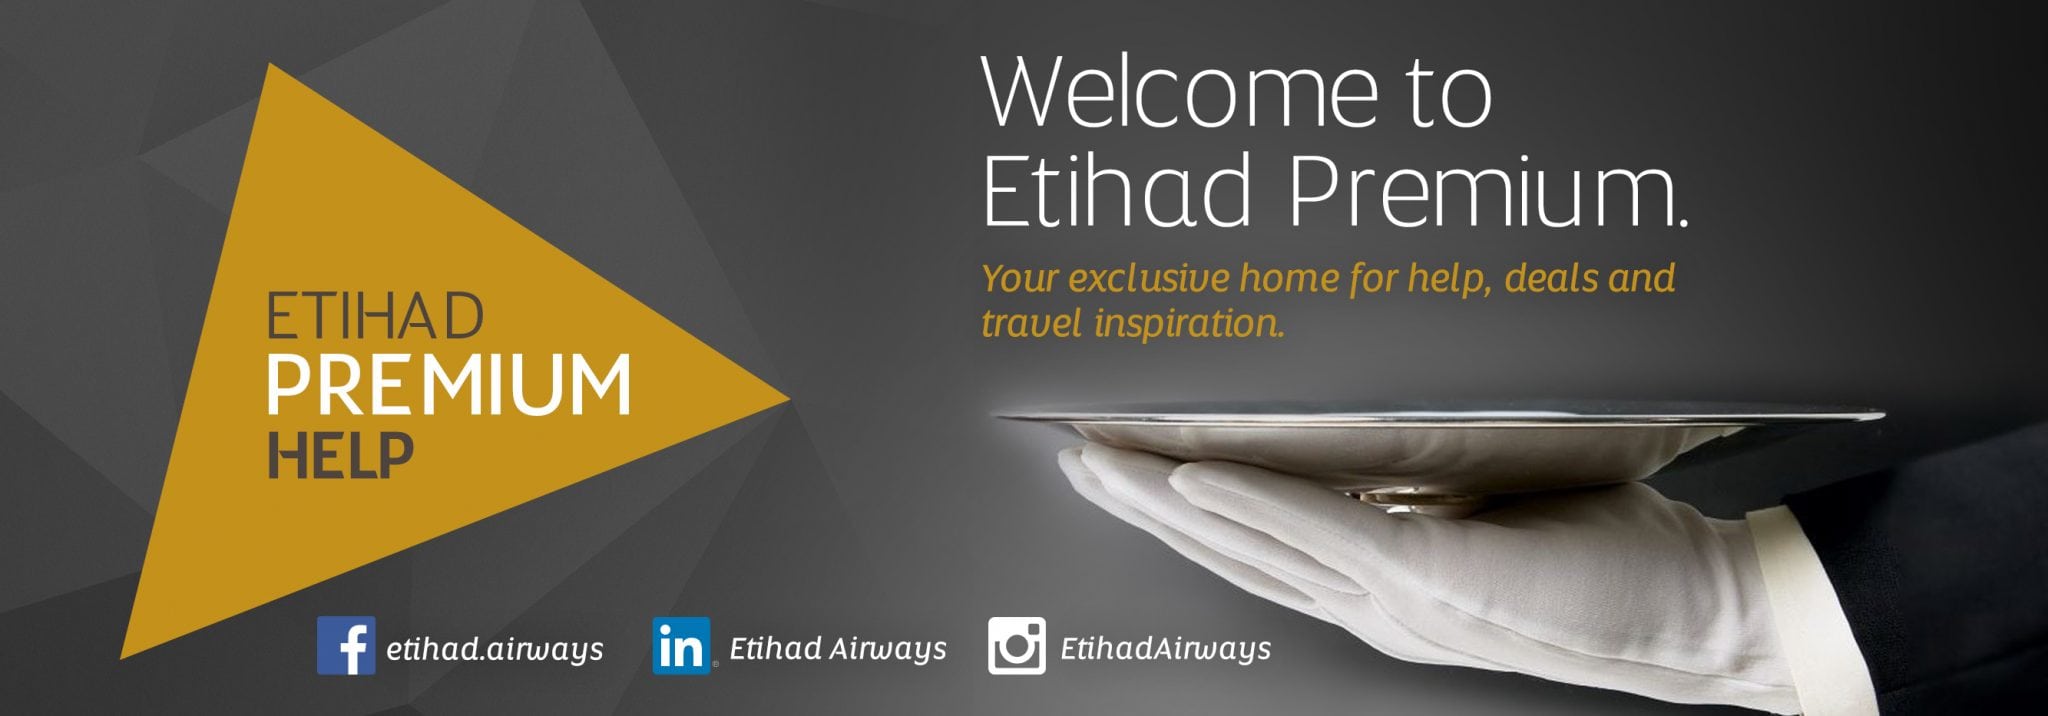 Etihad Airways' new Etihad Premium Twitter Feed aims to give Frequent Flyers the white glove treatment on Social Media